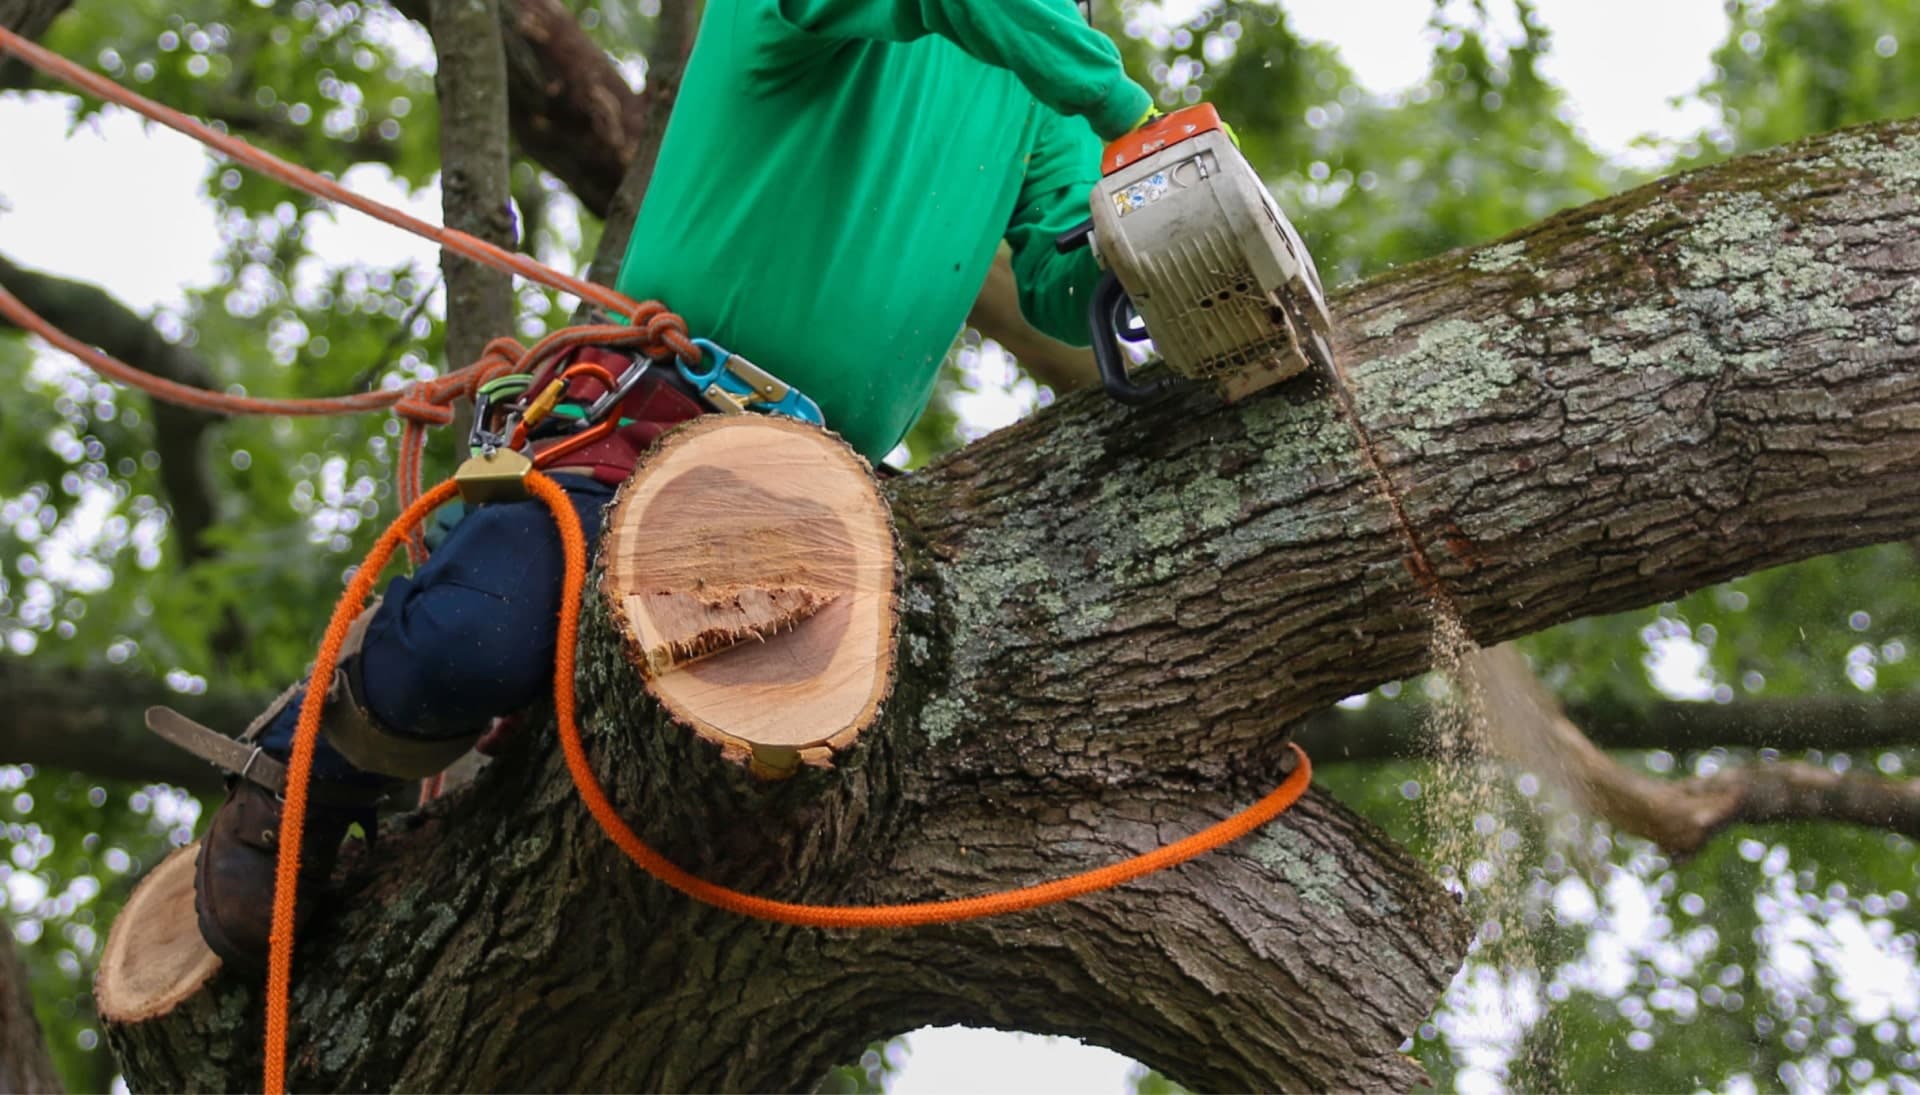 Shed your worries away with best tree removal in Lincoln